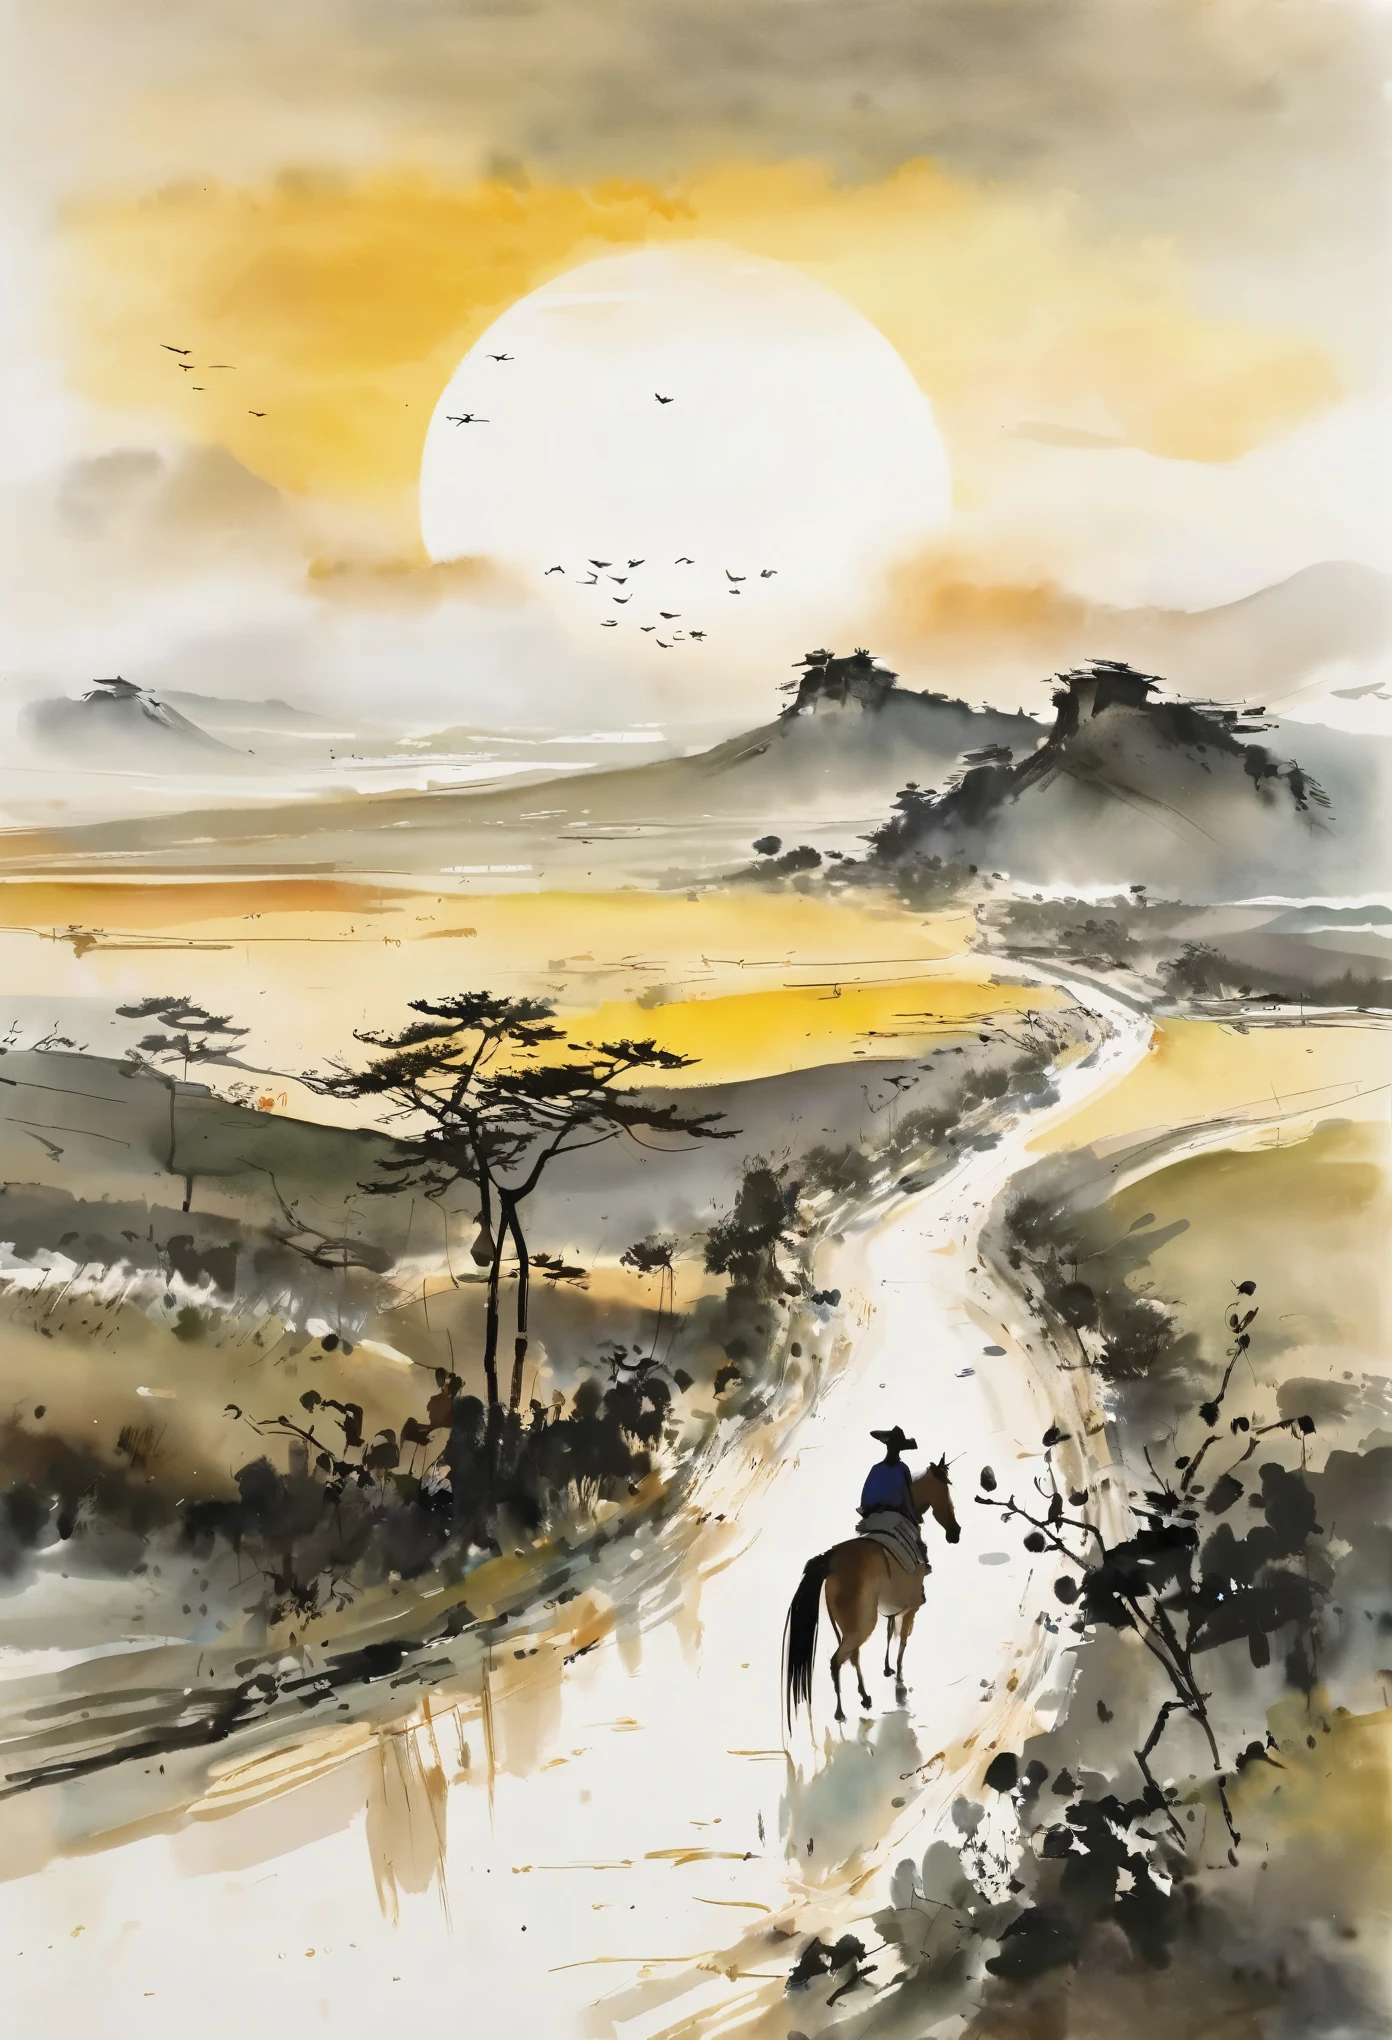 A scene inspired by the poetry of an ancient road, with a thin horse standing against the western breeze. Capture the mood of the setting sun, casting its golden hues over the landscape. Emulate the brushstrokes and aesthetic of Wu Guanzhong, emphasizing the simplicity and elegance of his ink washes. Depict the traveler, lost and forlorn, standing at the end of the world, overwhelmed by the vastness and beauty of the scene. Capture the emotional depth and the sense of melancholy inherent in the poem.